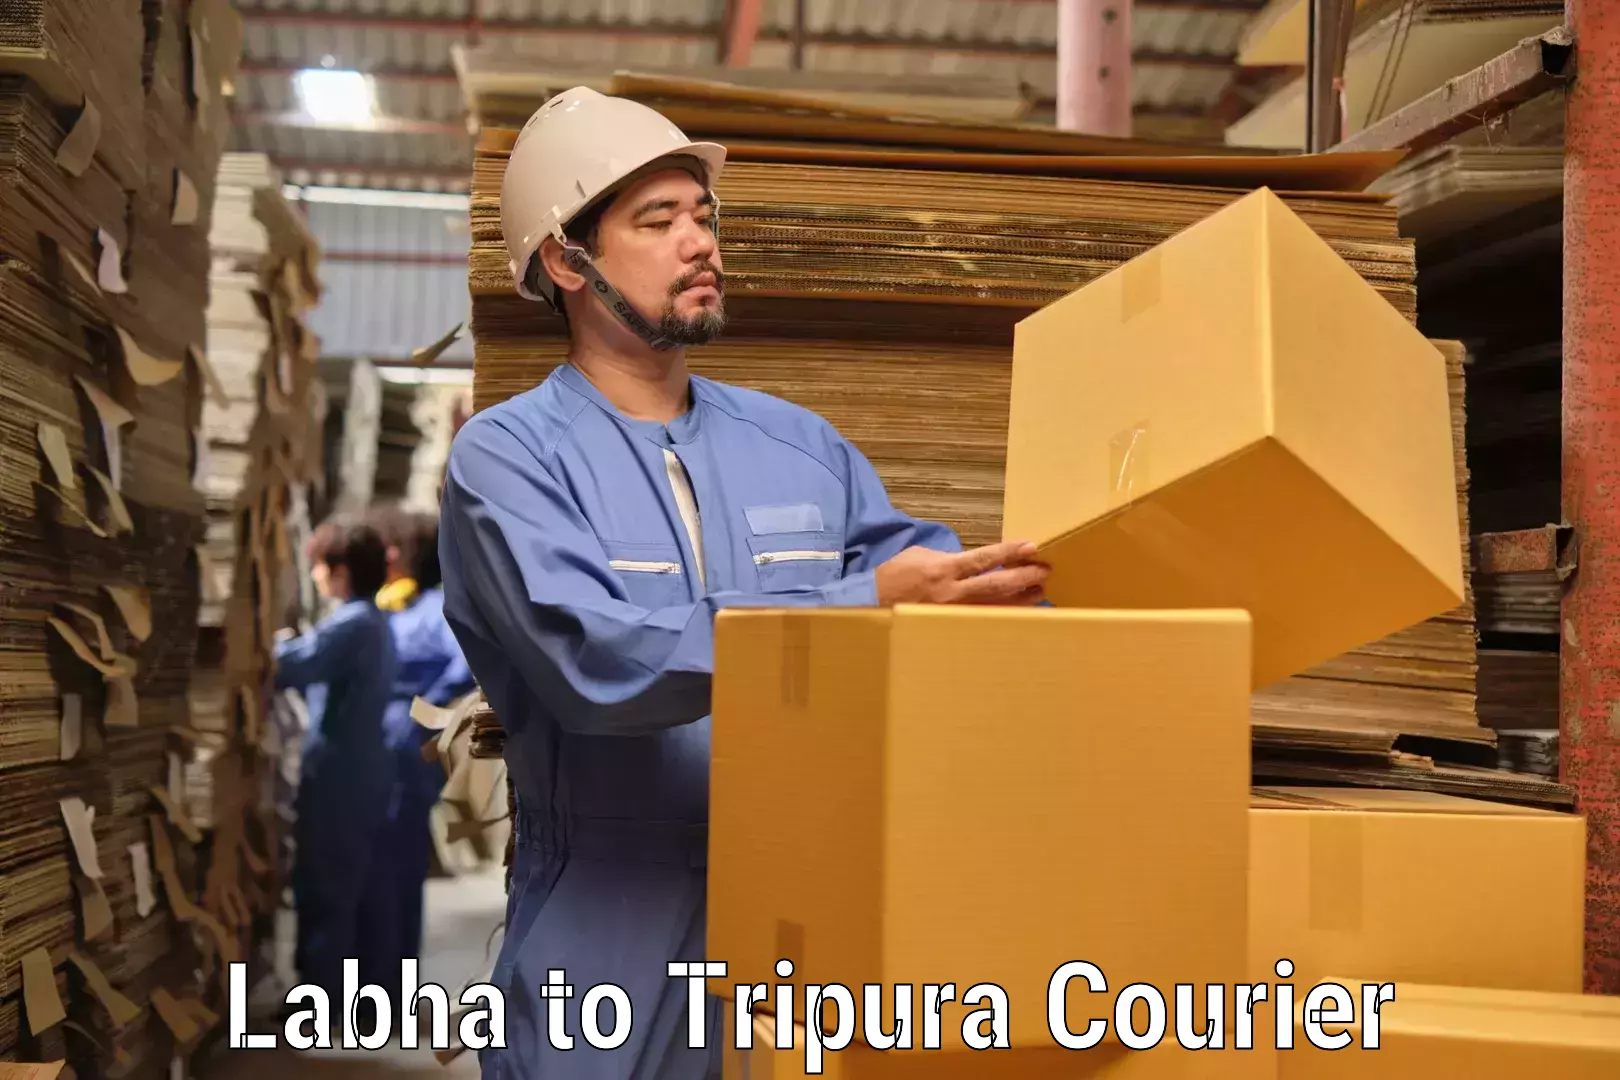 Automated parcel services Labha to Udaipur Tripura